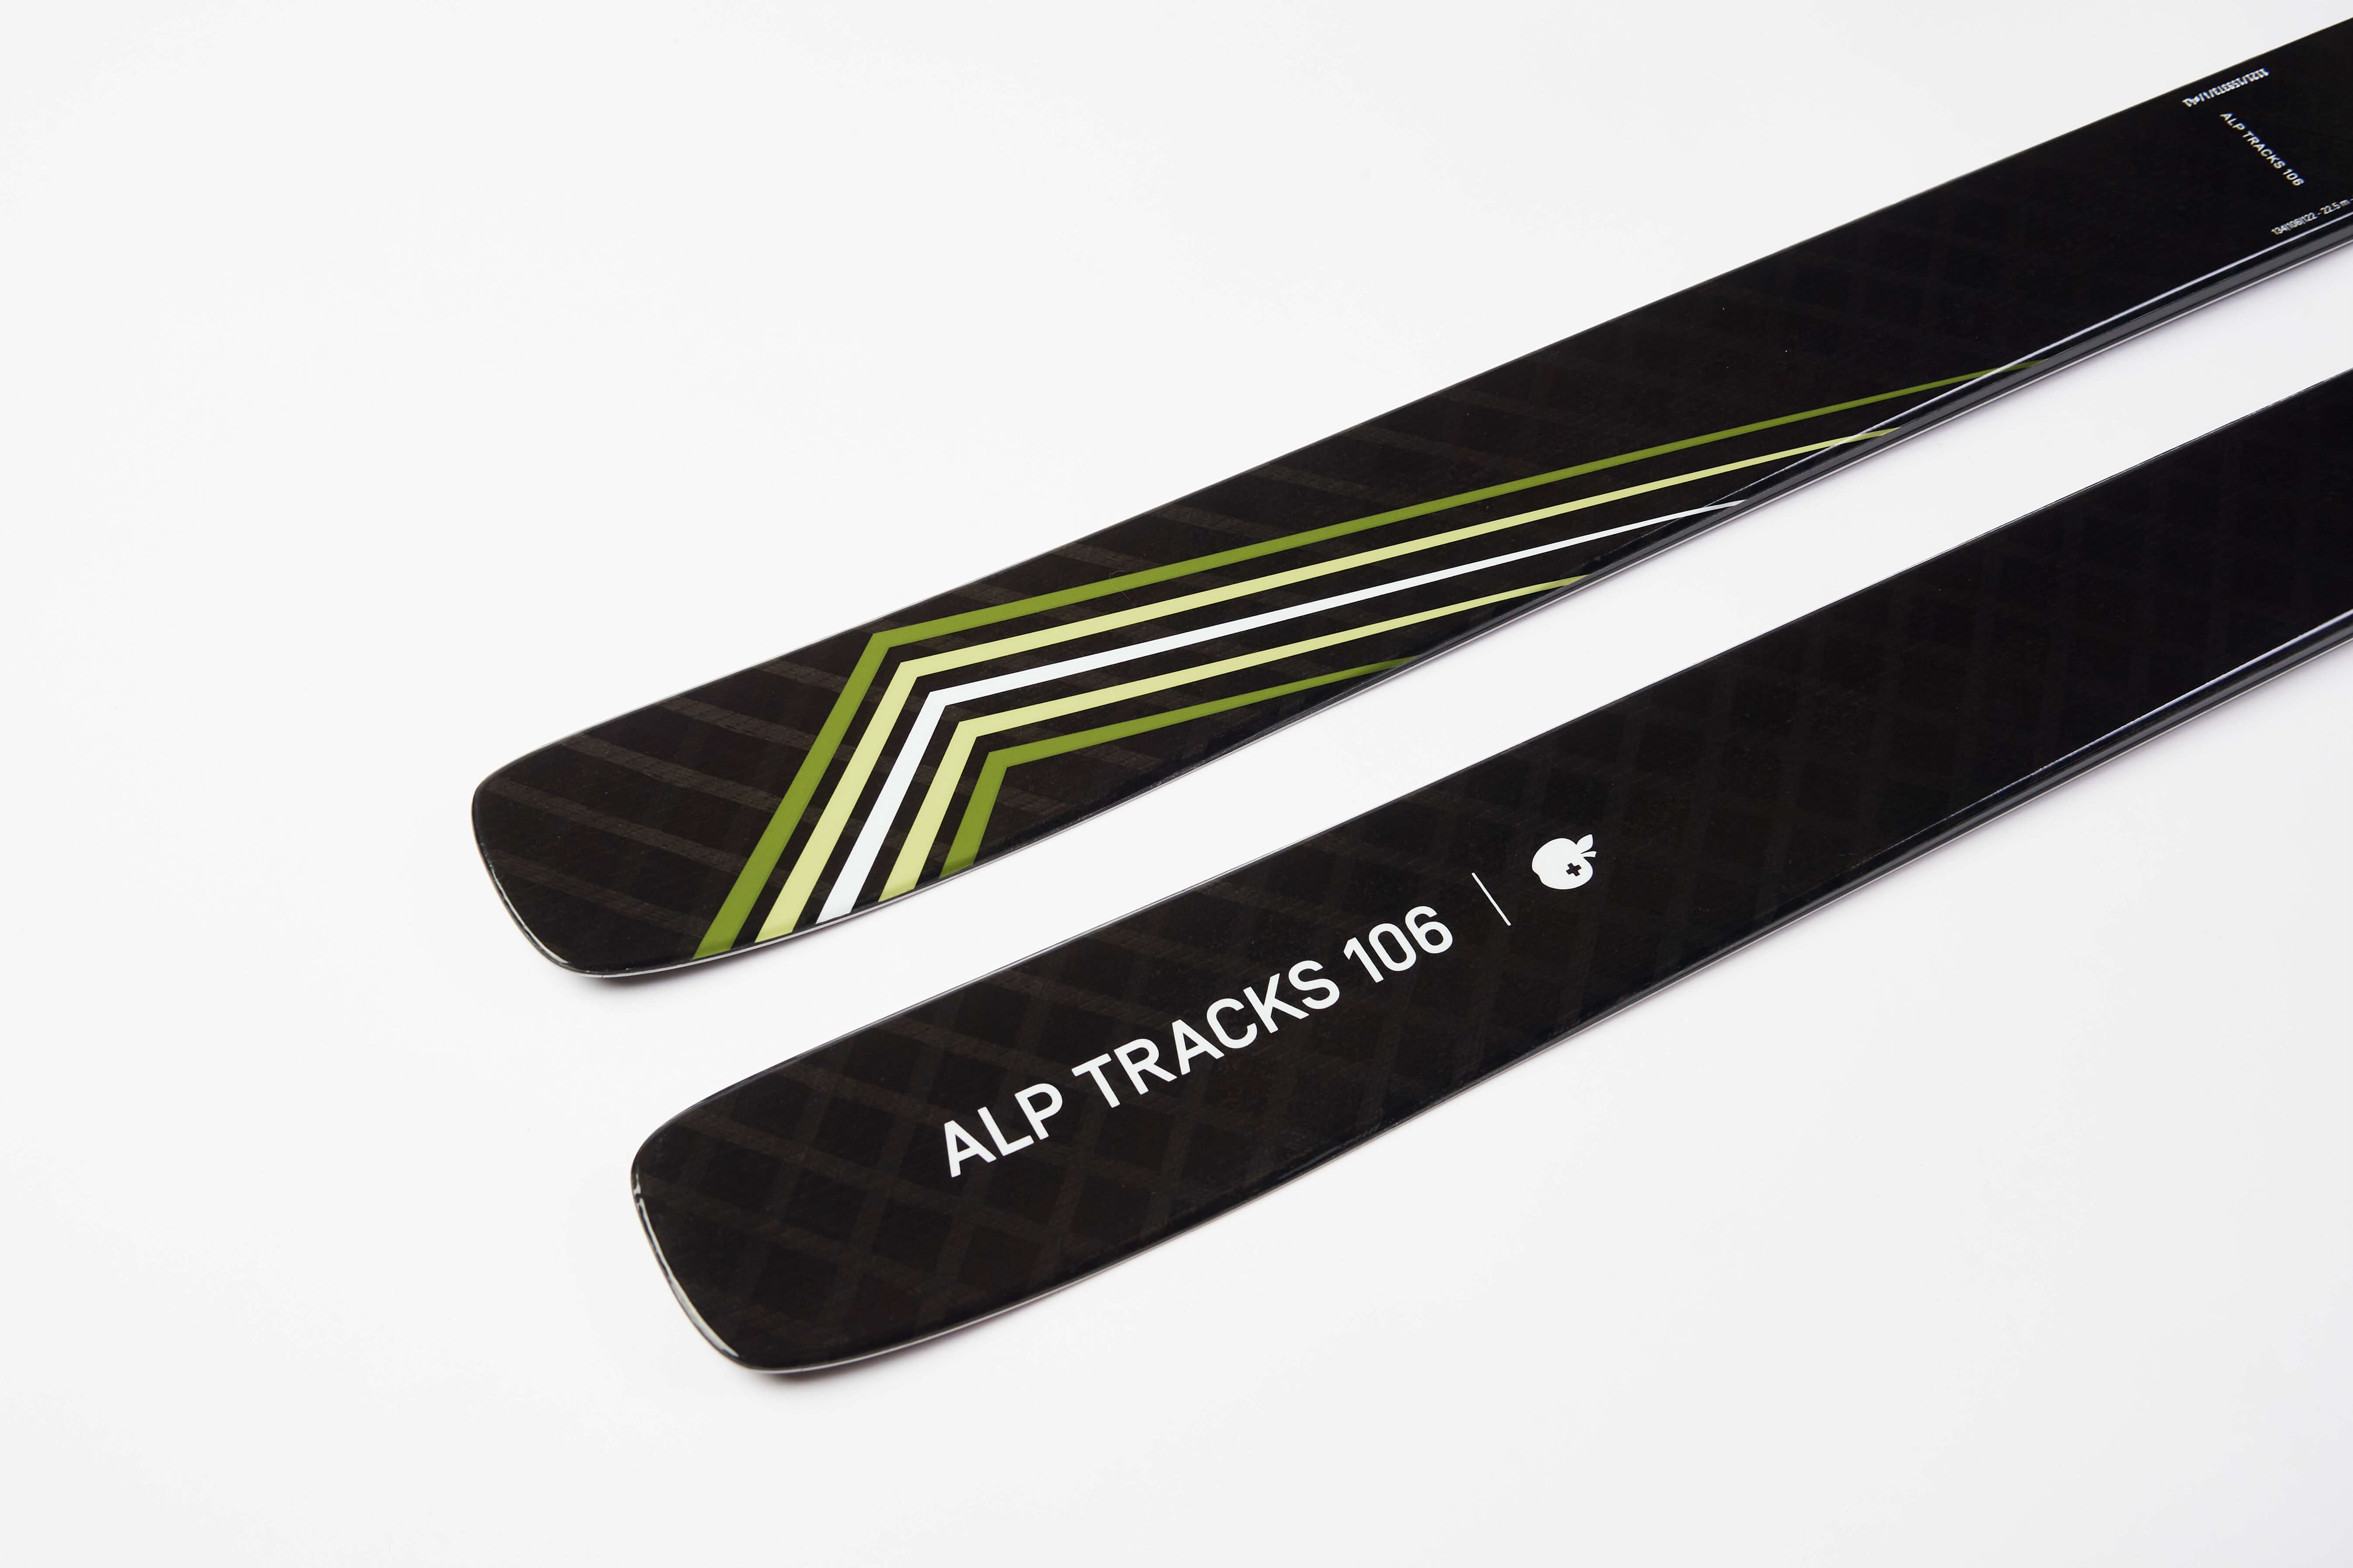 Discover backcountry bliss with Movement's Alp Tracks 106 touring skis.